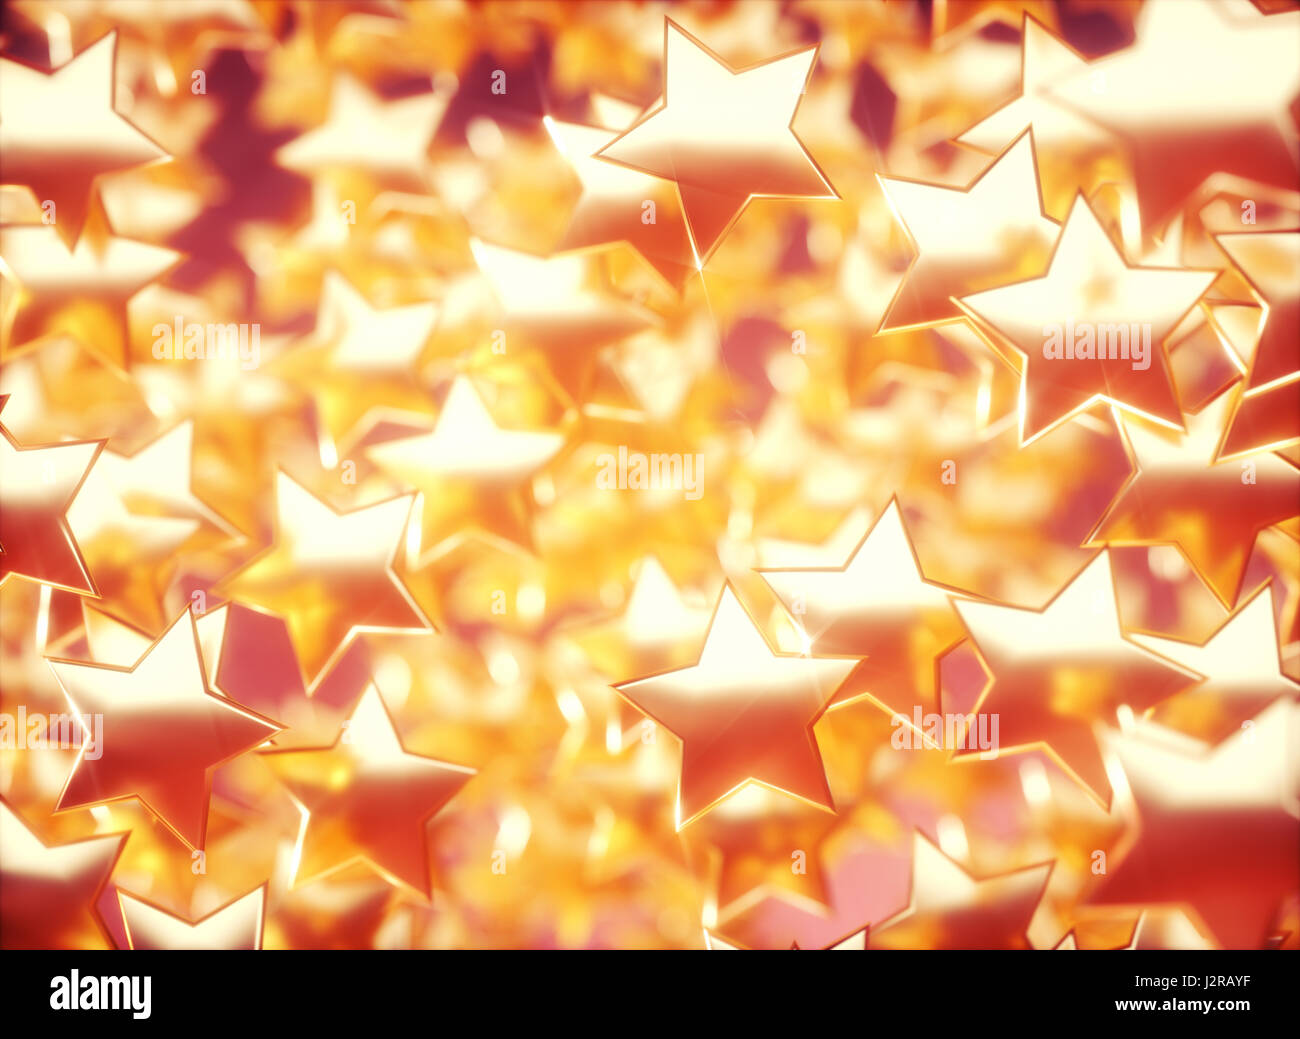 3D illustration. Background image with golden stars. Image with depth of field. Stock Photo